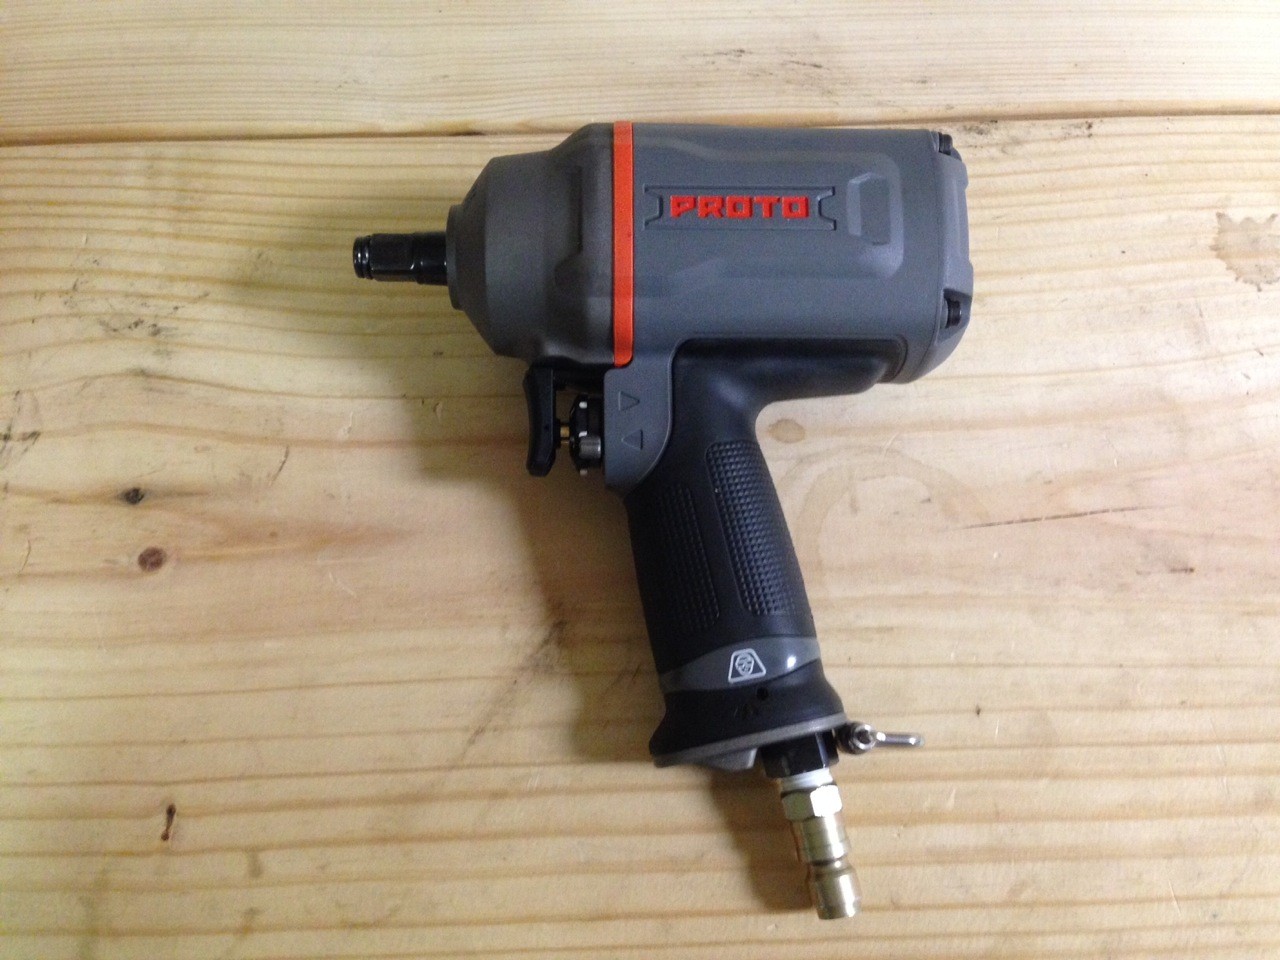 Proto J150WP 1/2 Drive Air Impact Wrench Proto J15 for sale online 